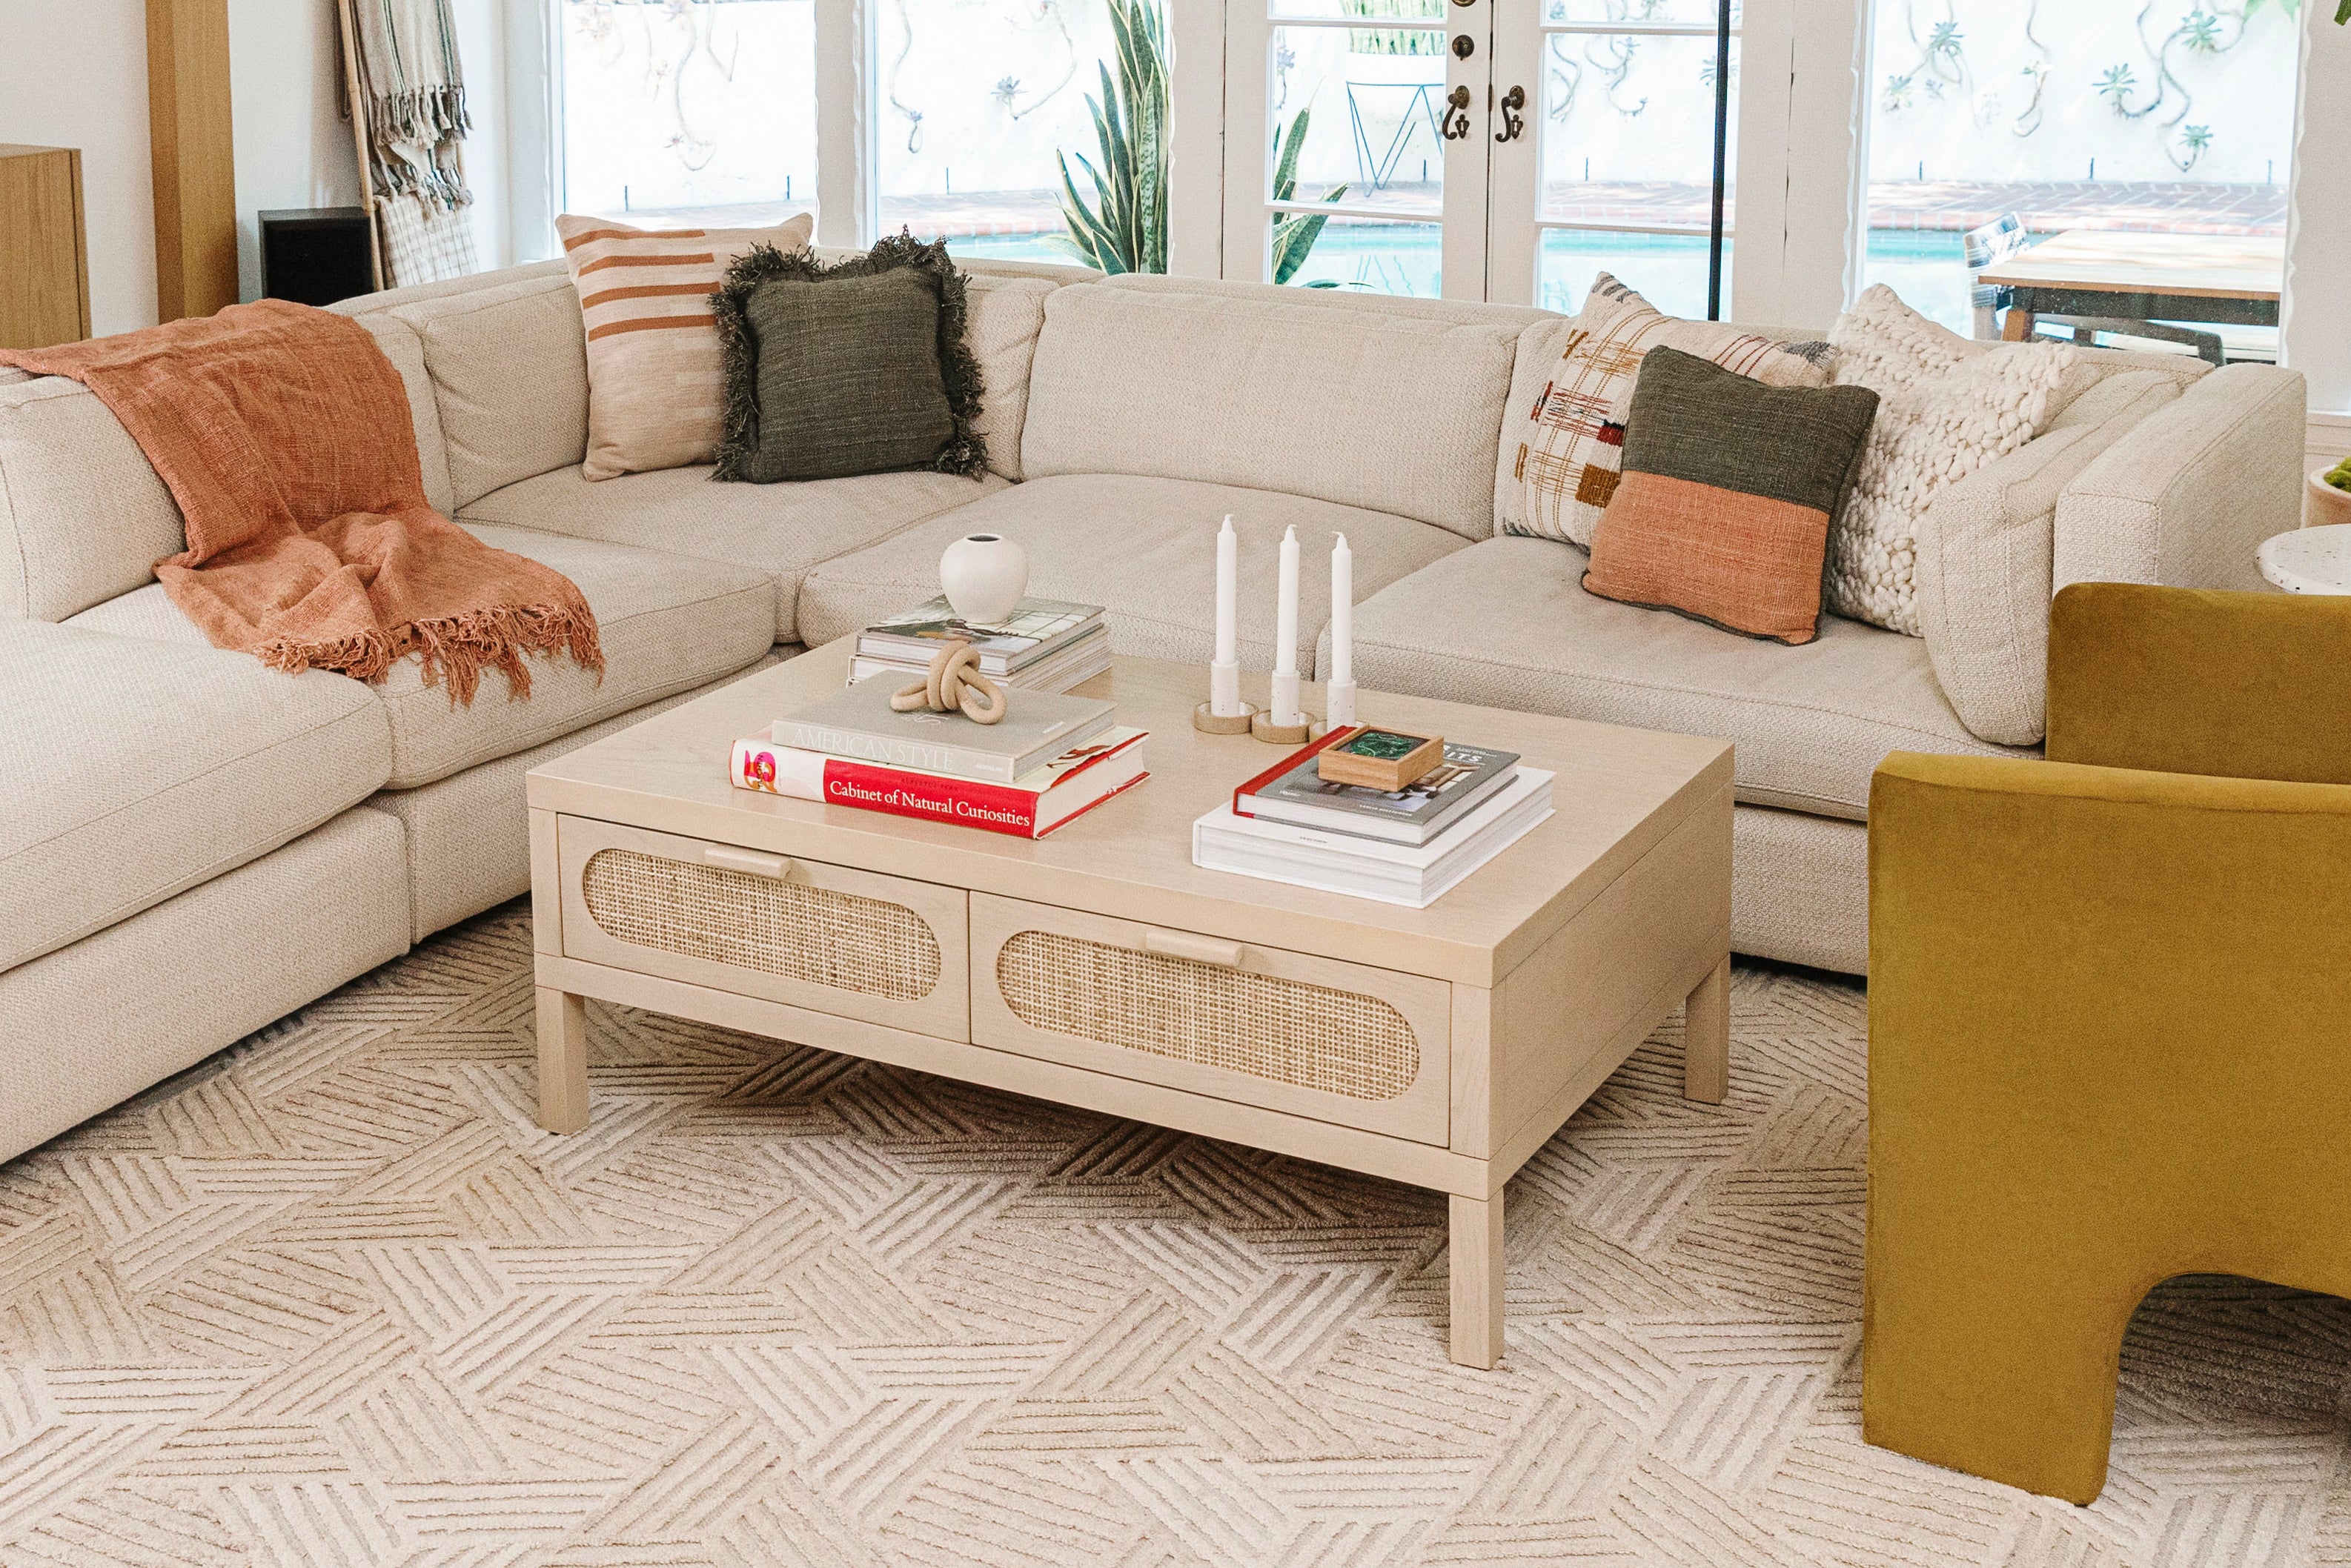 Home Style Edit: How To Style A Coffee Table